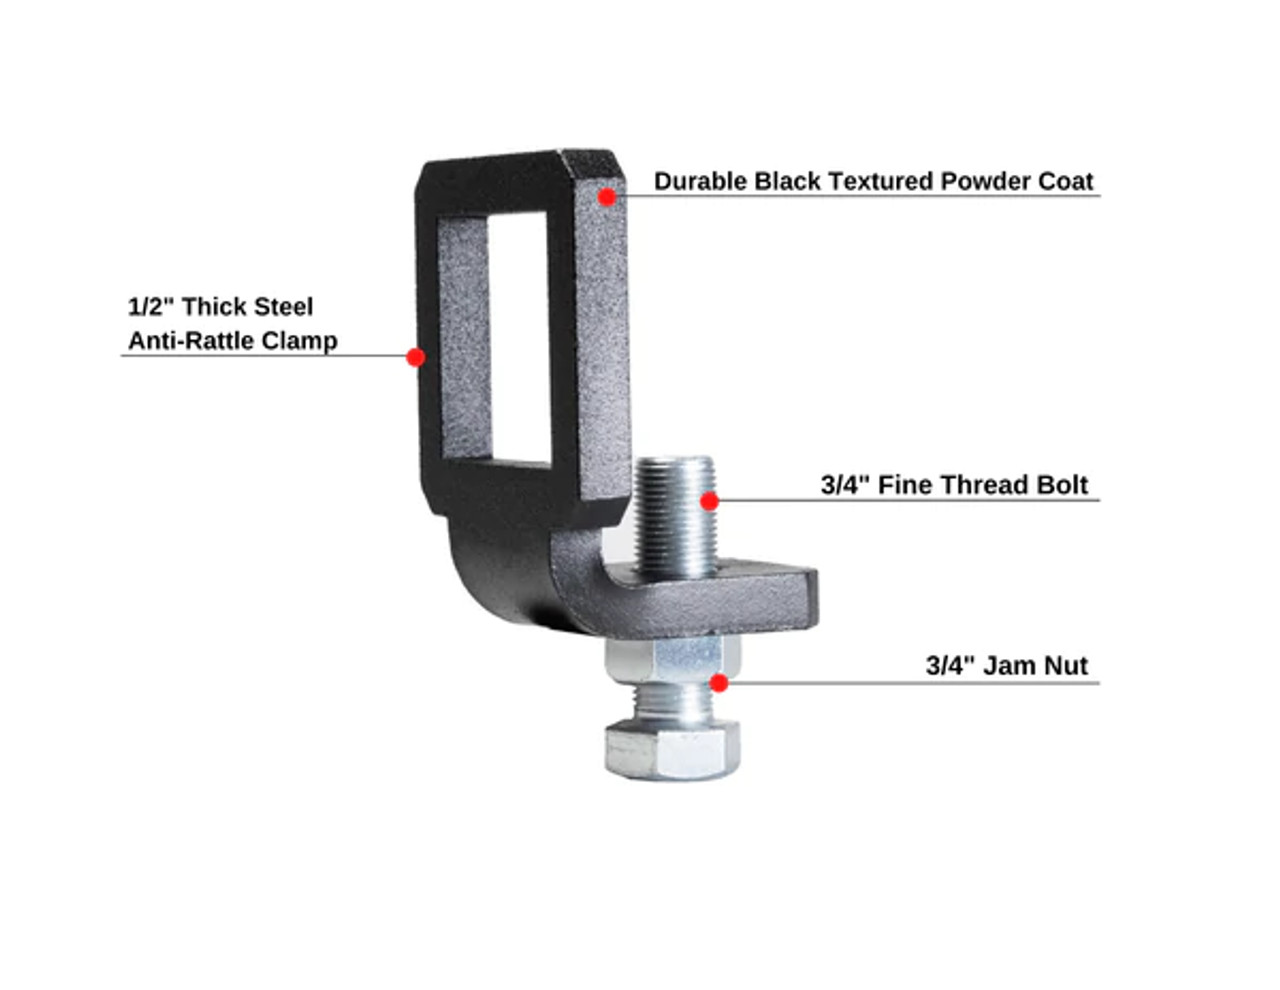 2" BULLETPROOF ANTI-RATTLE CLAMP-Features View